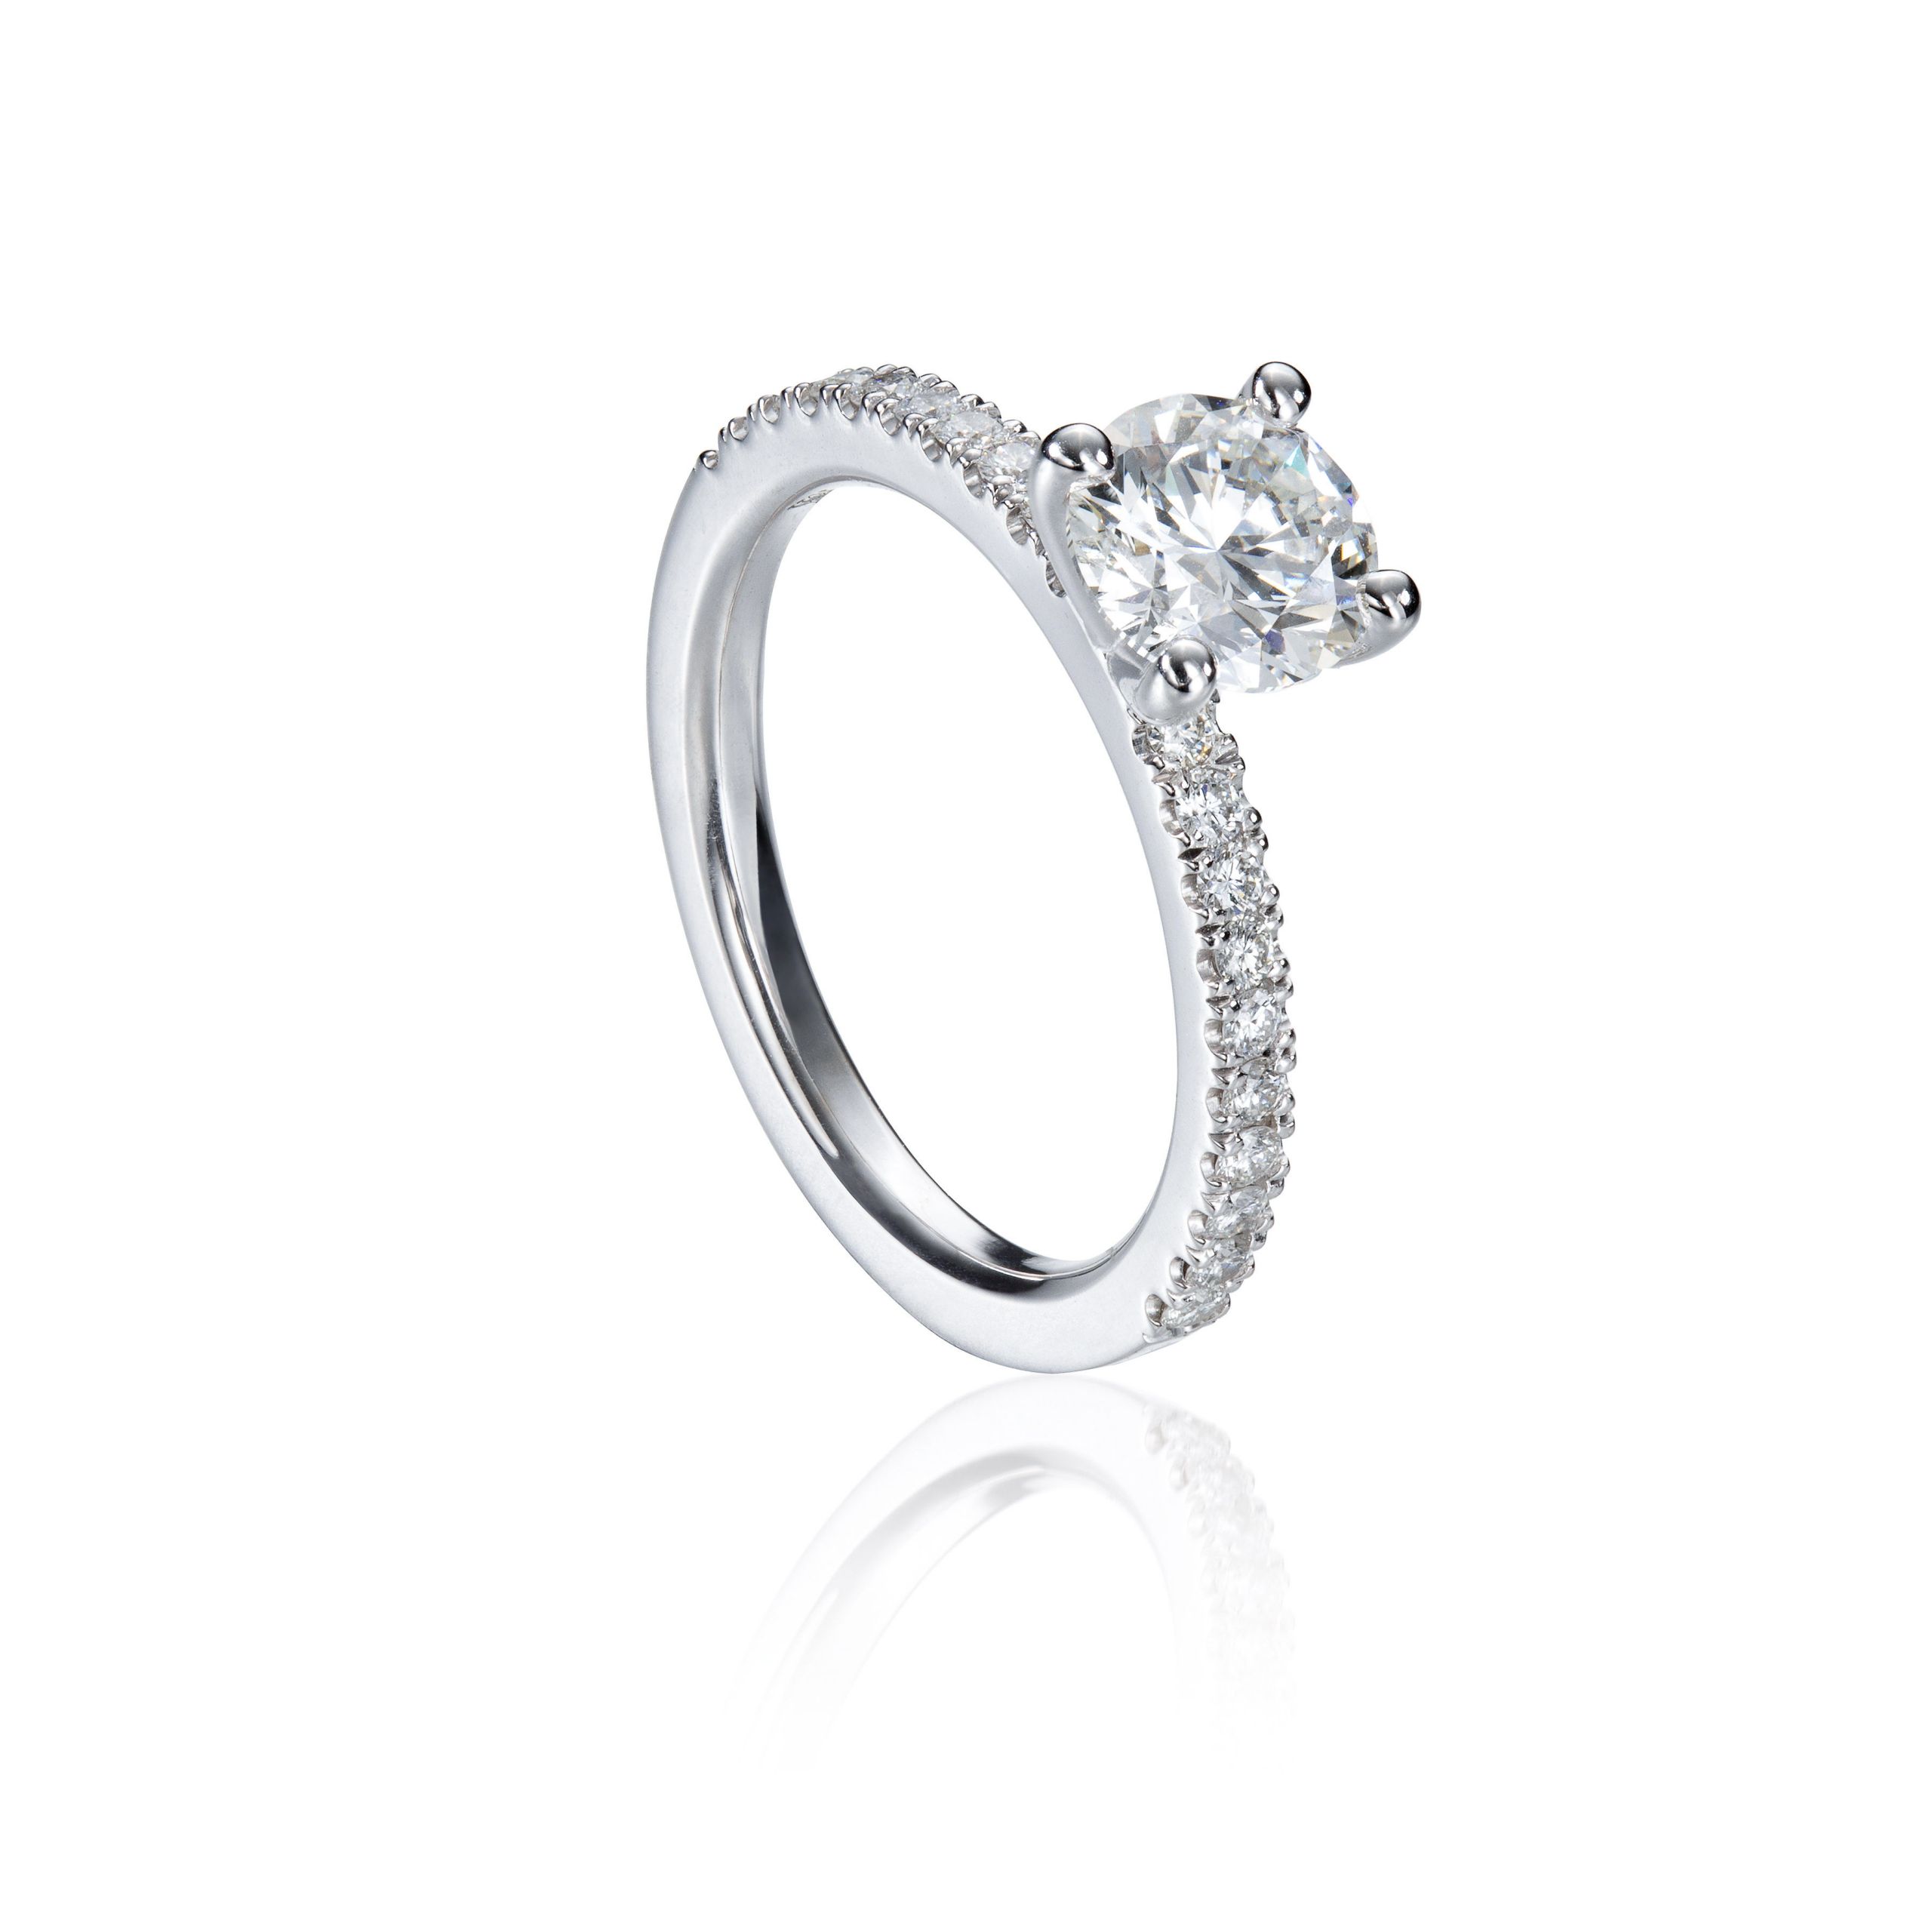 Signature Round Cut Diamond Engagement Ring with Pavé Setting on the Band